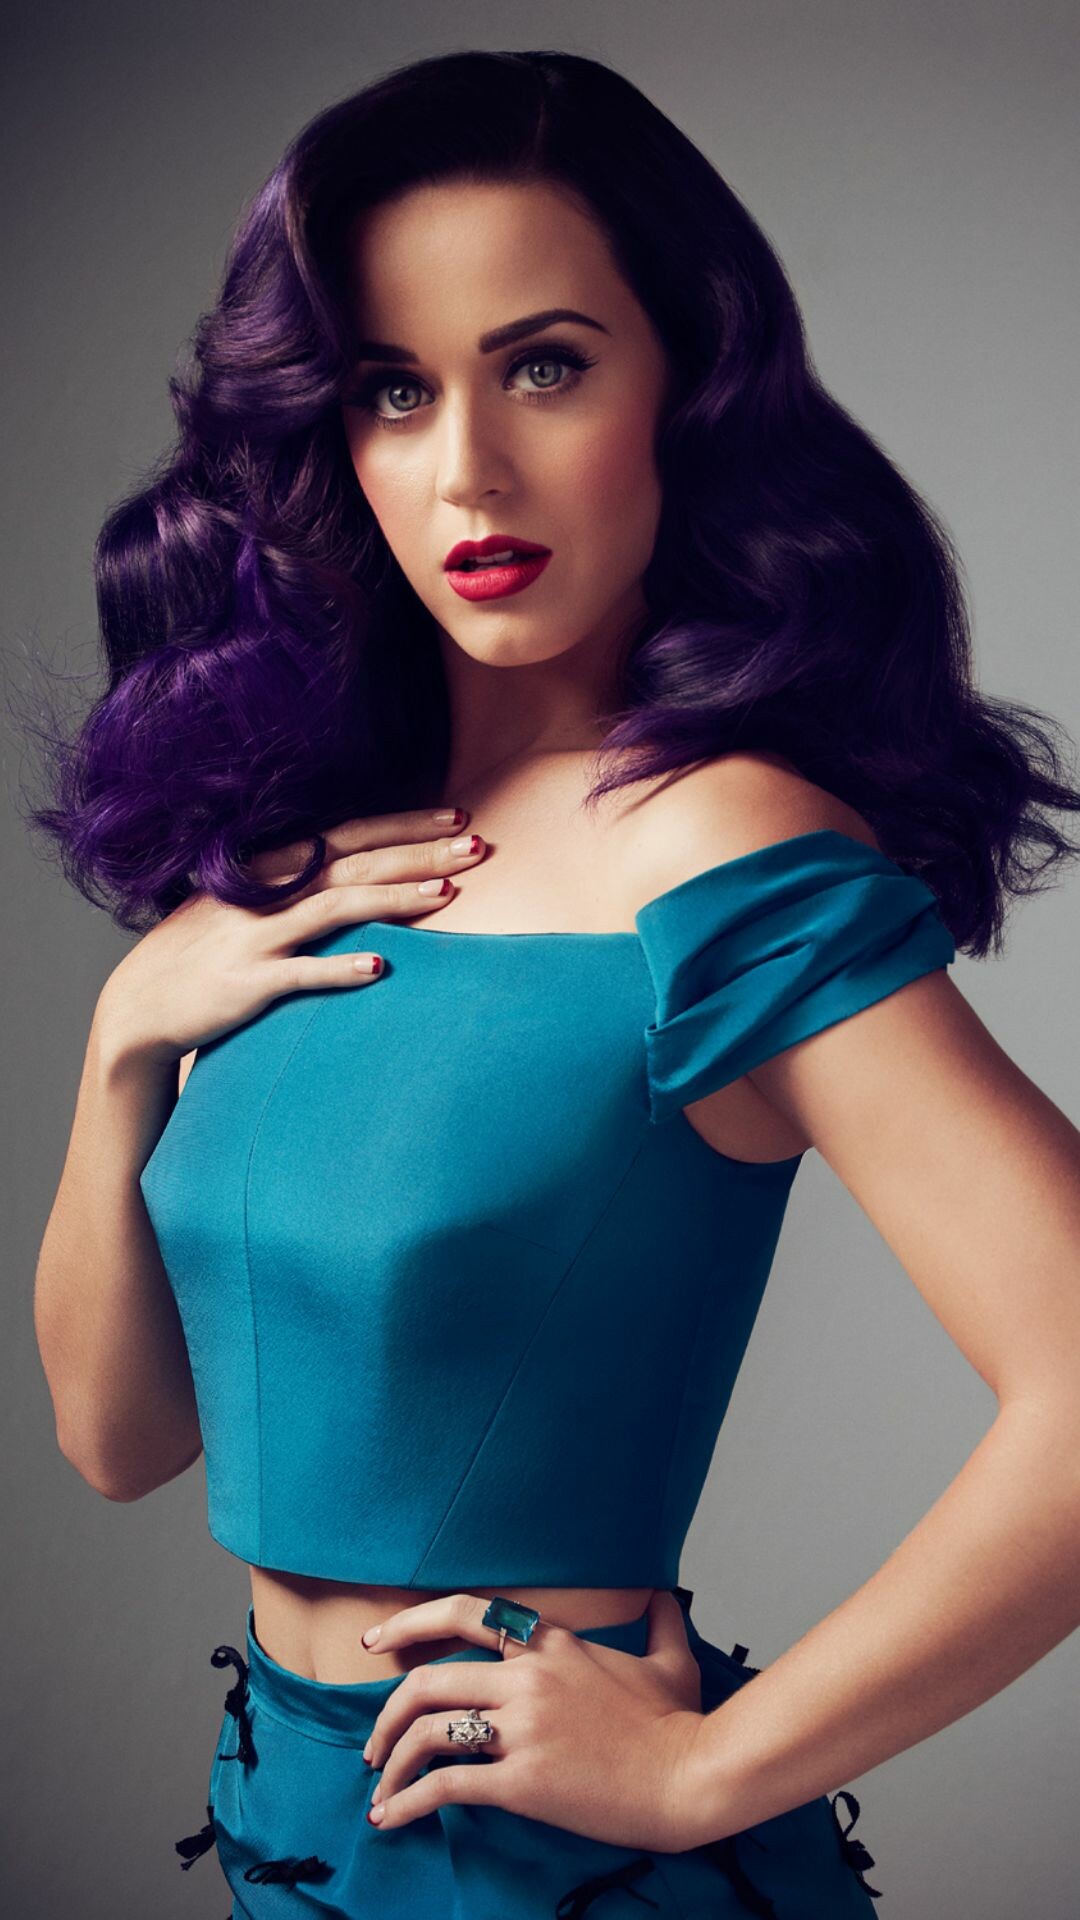 Katy Perry: Signed to Capitol Records in April 2007, An American singer. 1080x1920 Full HD Background.